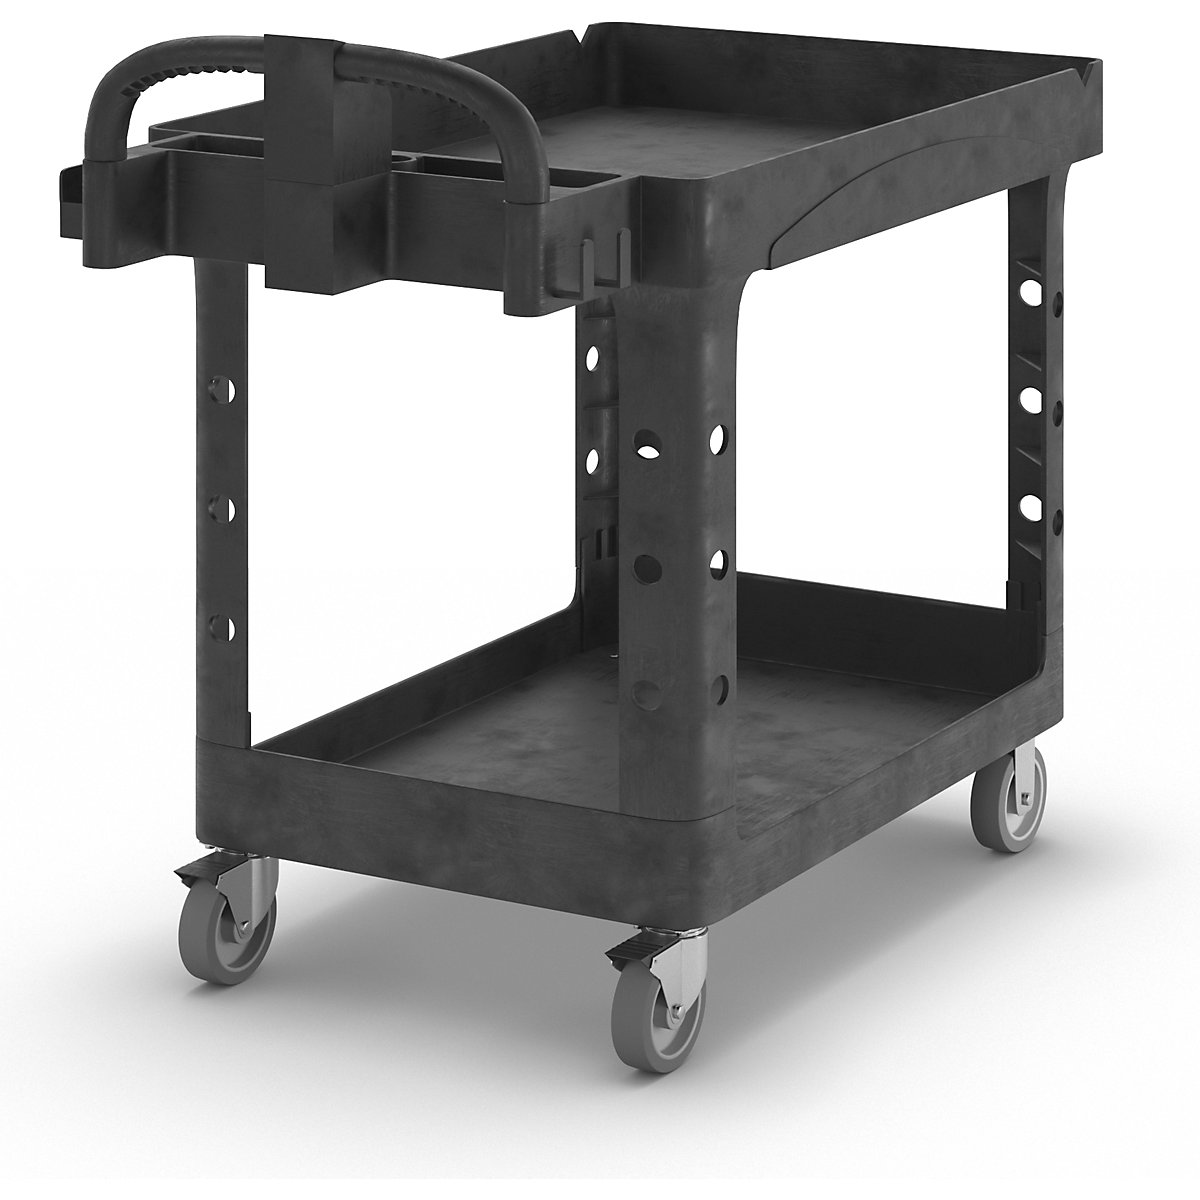 General purpose table trolley made of plastic – Rubbermaid